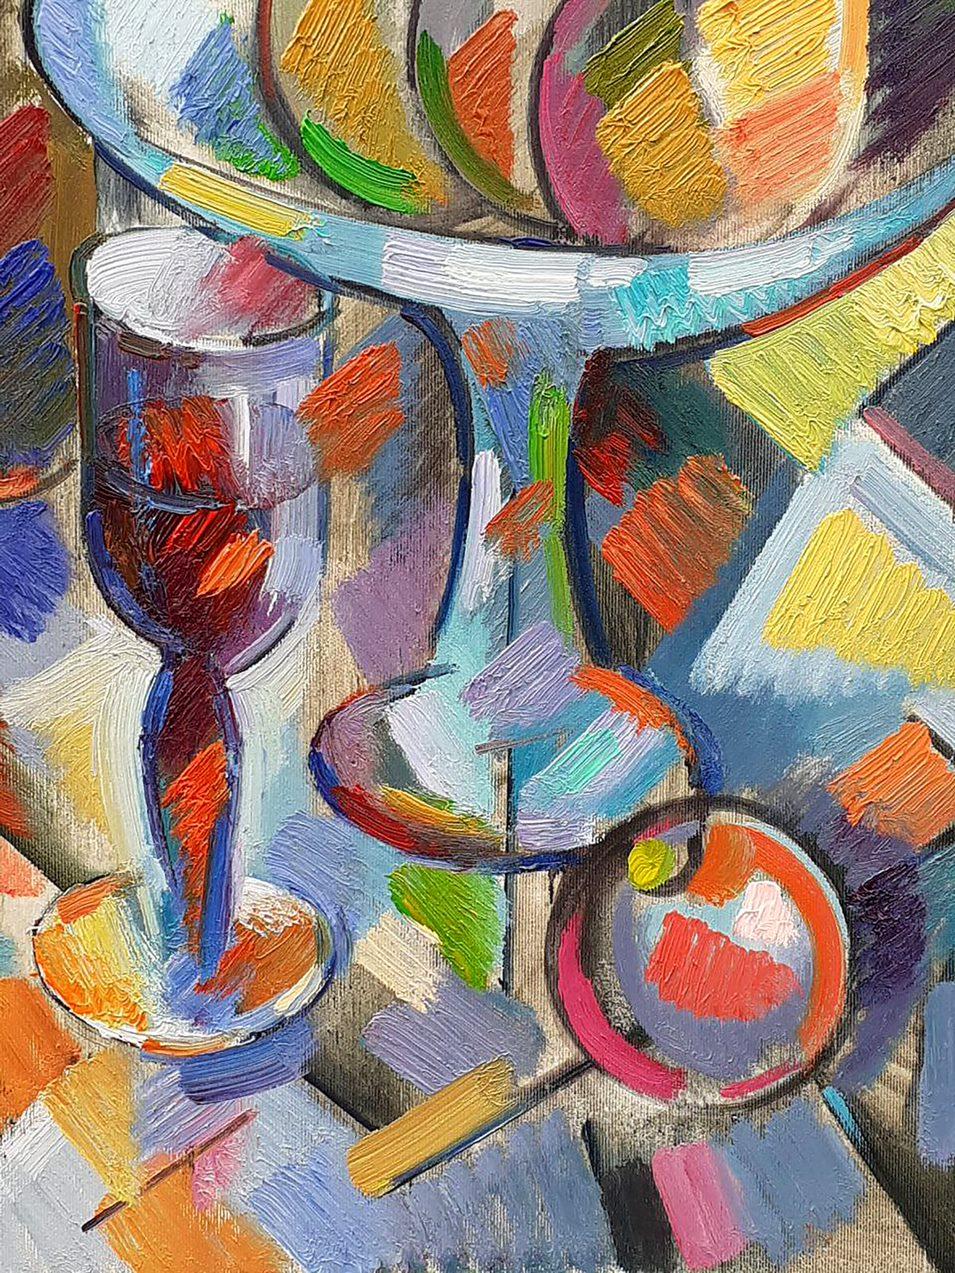 Artist: Peter Tovpev
Work: Original oil painting, handmade artwork, one of a kind 
Medium: Oil on Canvas 
Year: 2022
Style: Cubism
Title: Sweet Still Life
Size: 31.5